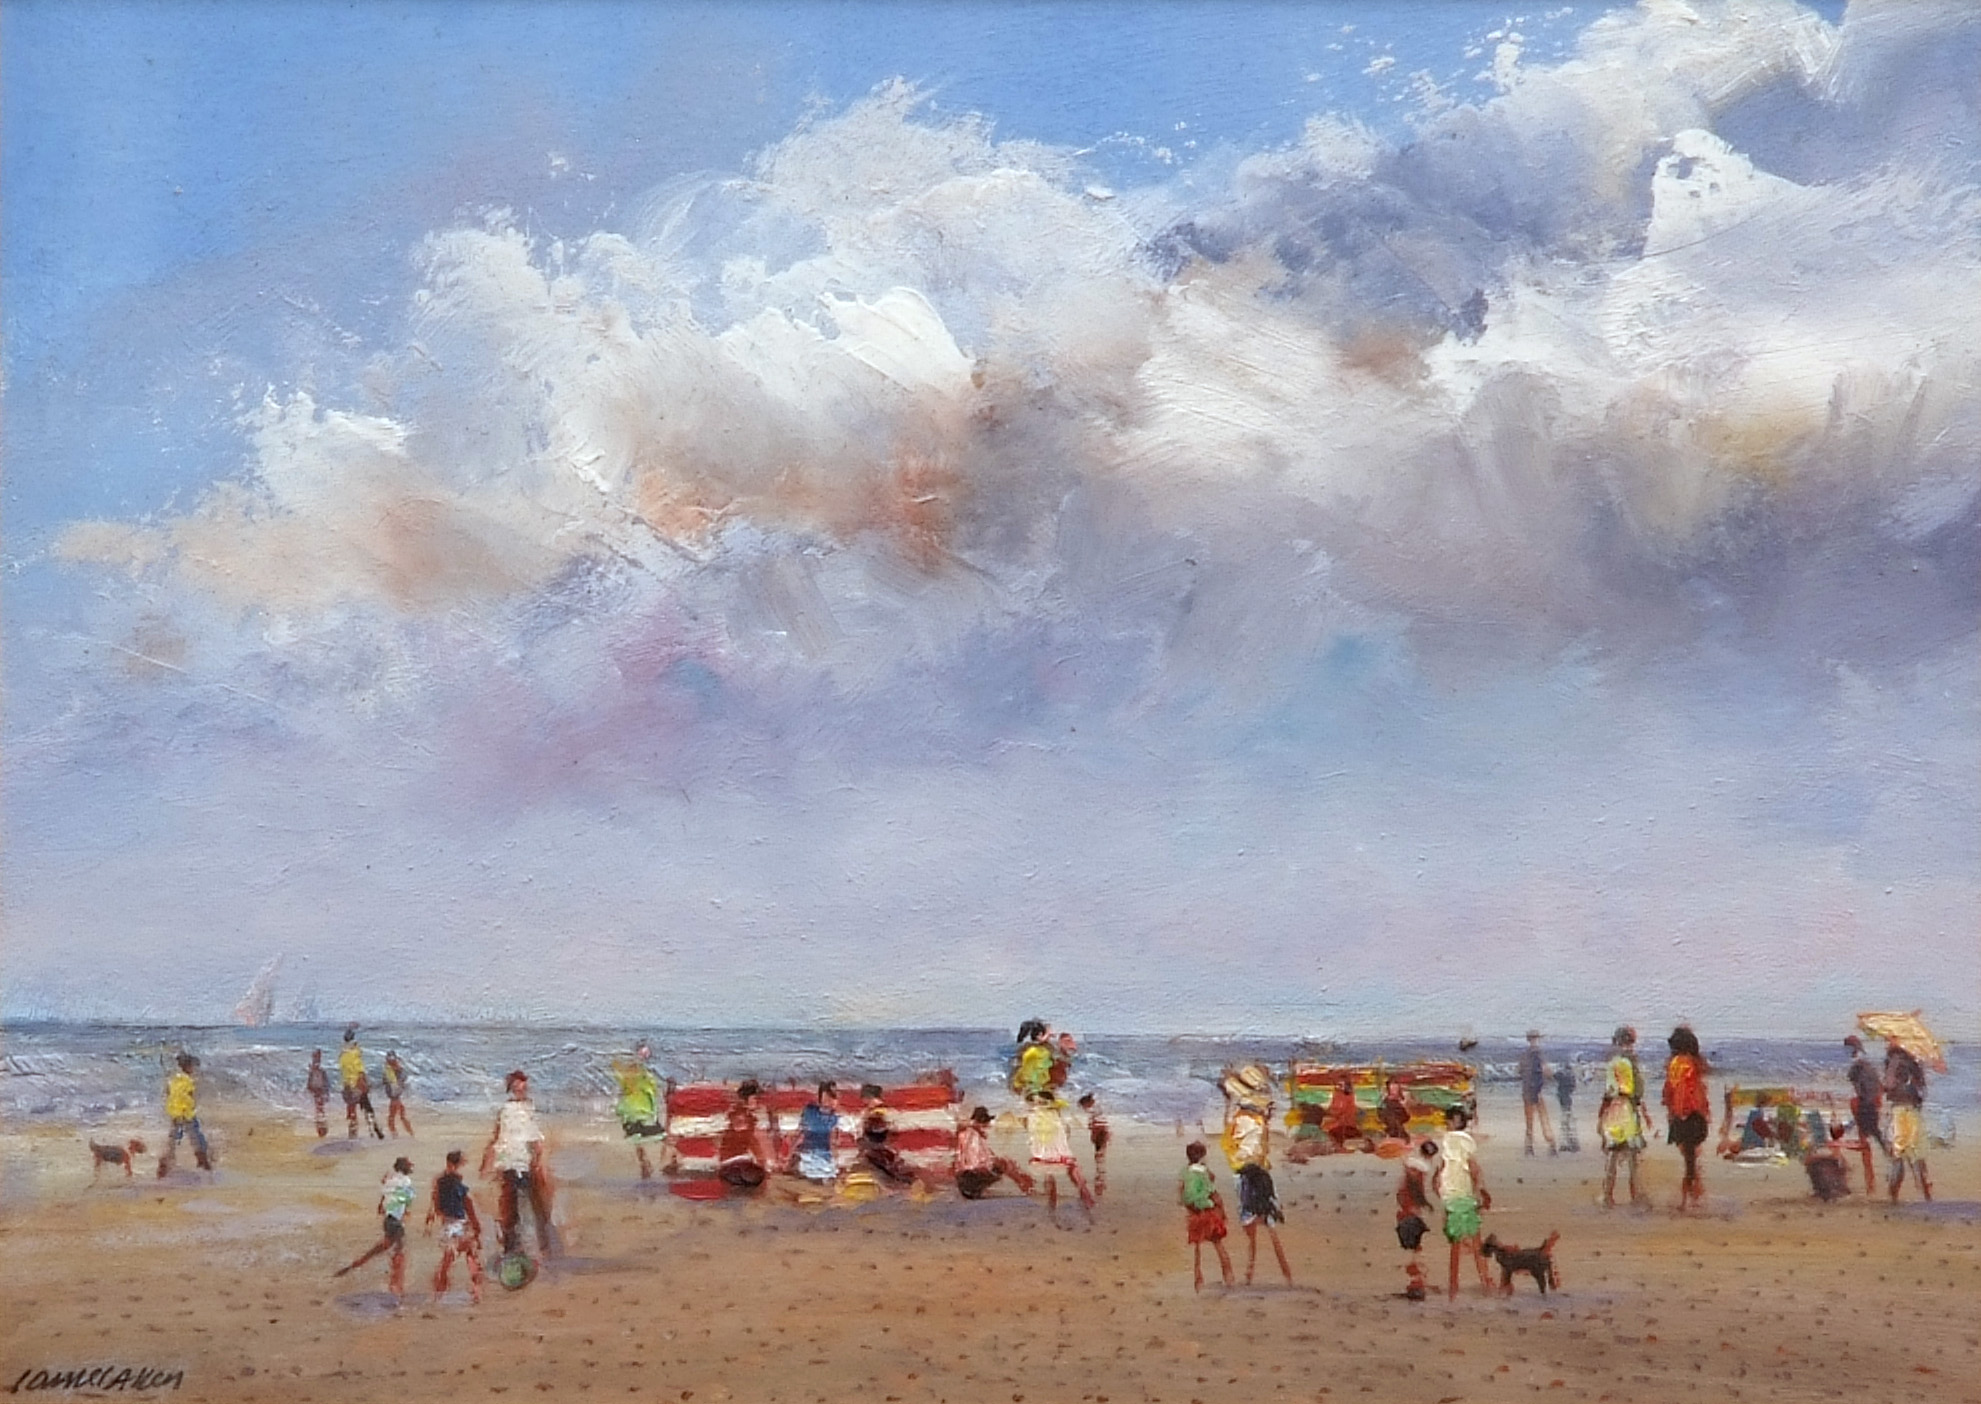 JAMES J ALLEN (CONTEMPORARY, BRITISH) "Half term at the beach, Norfolk" oil on board, signed lower